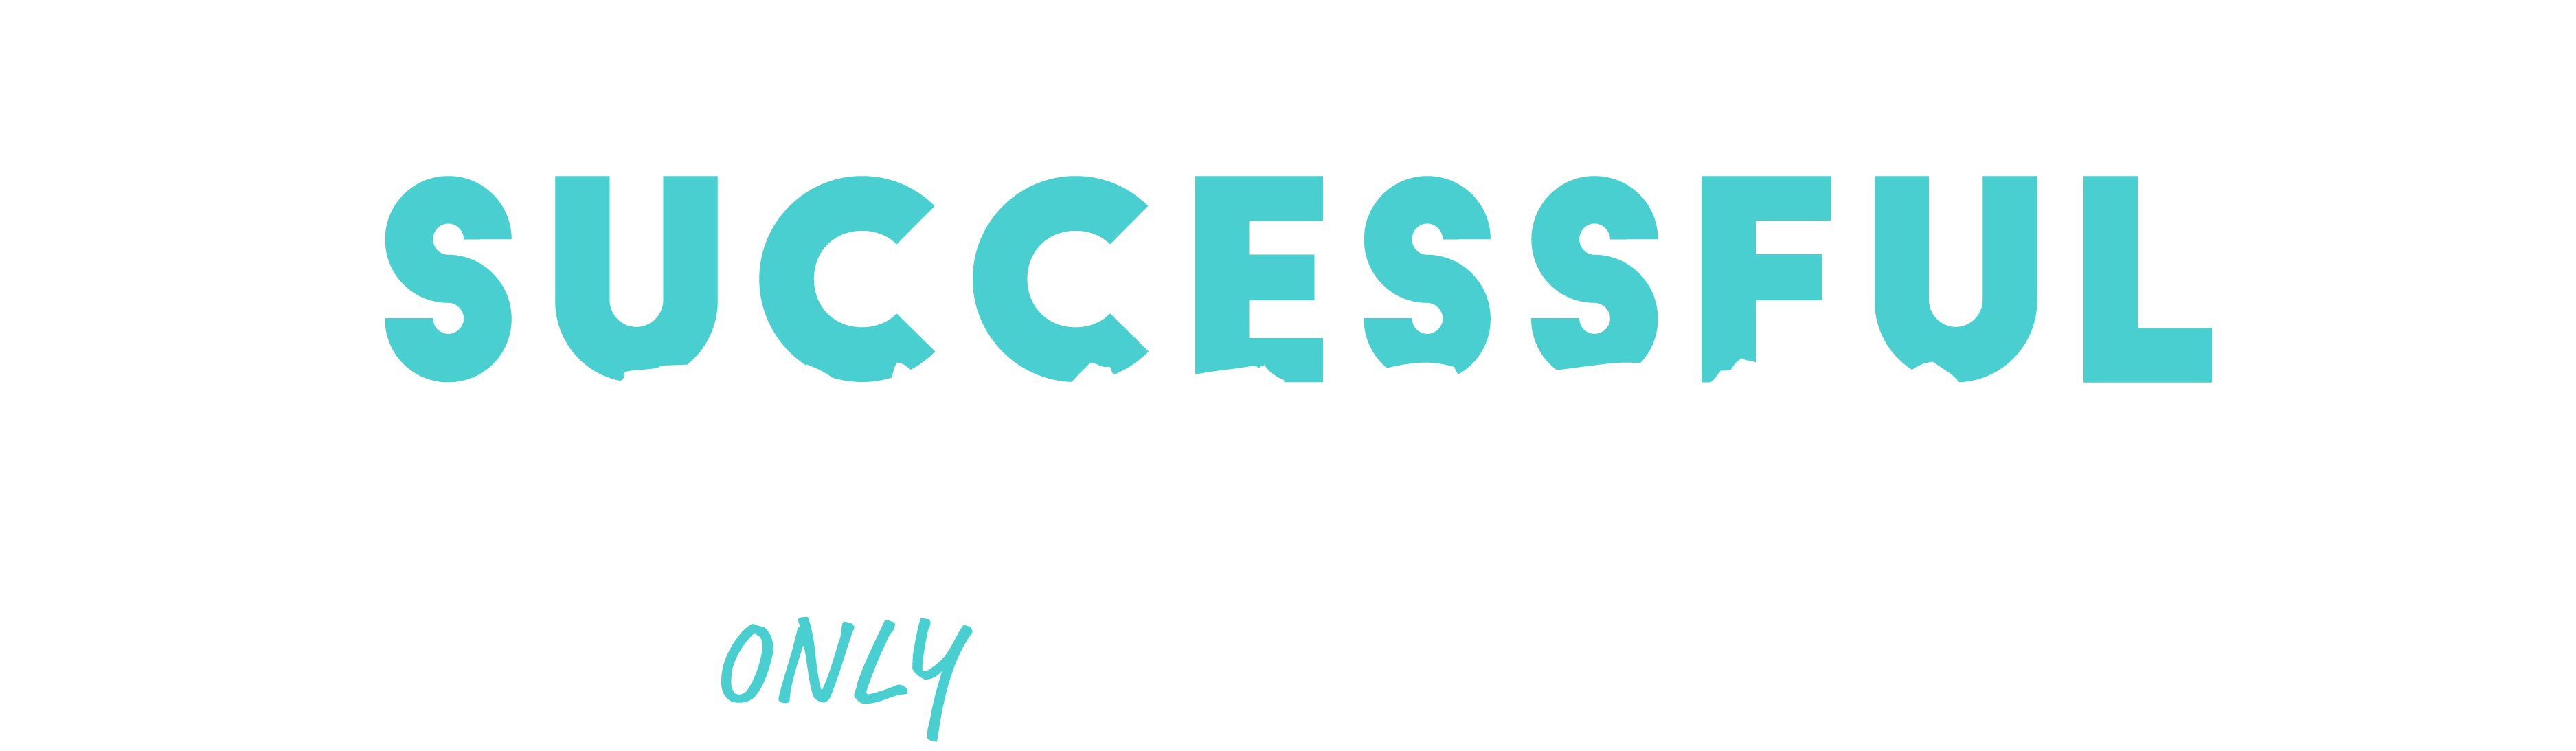 The Successful Investor is the ONLY program of its kind that...